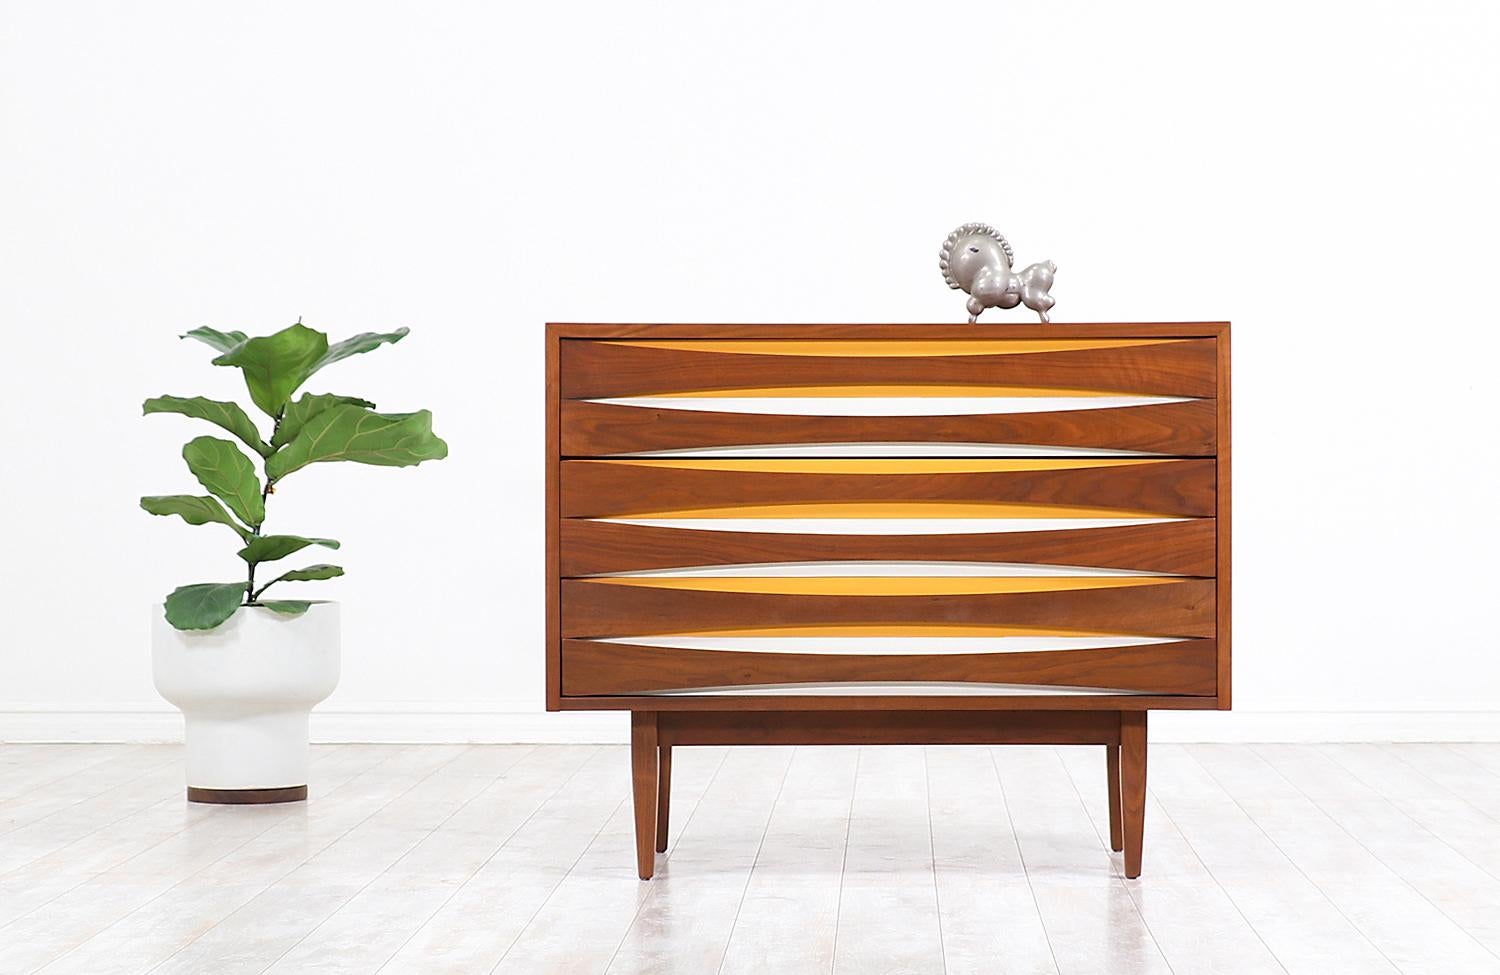 Stylish Mid-Century Modern chest designed and manufactured by West Michigan Furniture Co. in the United States, circa 1950s. This sleek chest design with a classic take on the style of Arne Vodder, features three dovetailed drawers and a walnut wood